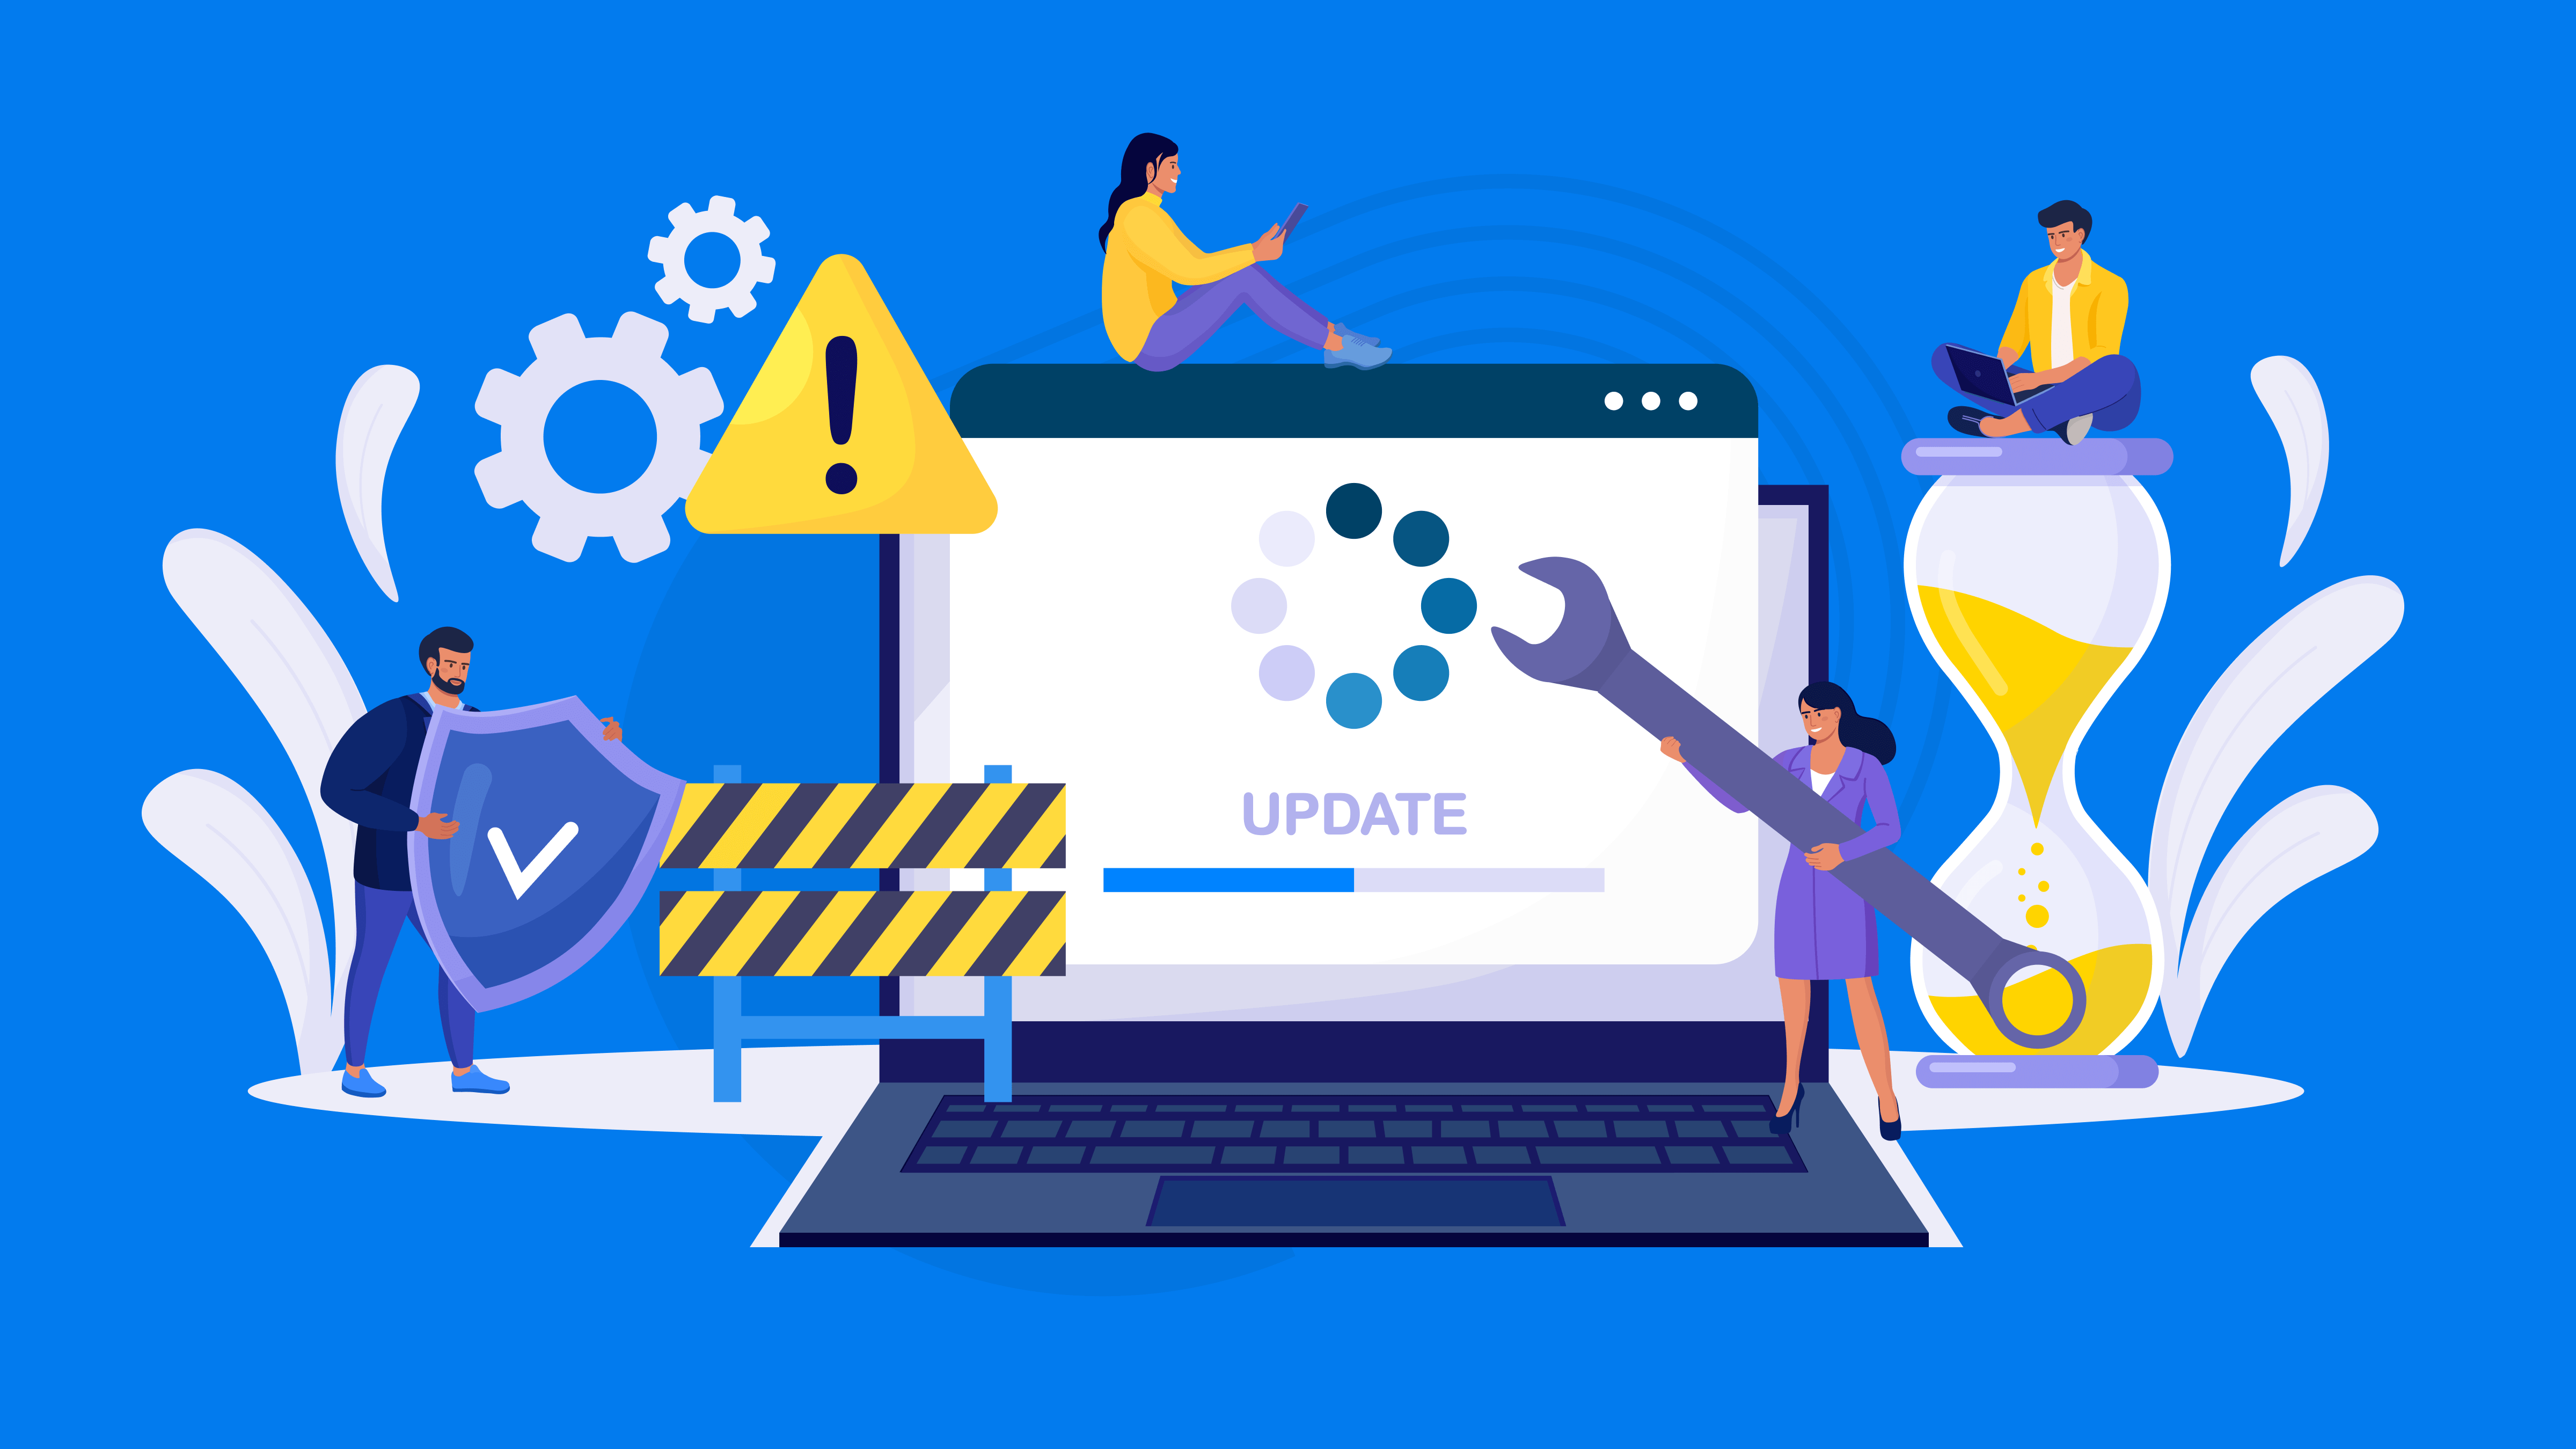 5 Ways to Improve User Experience (UX) Through Application Maintenance